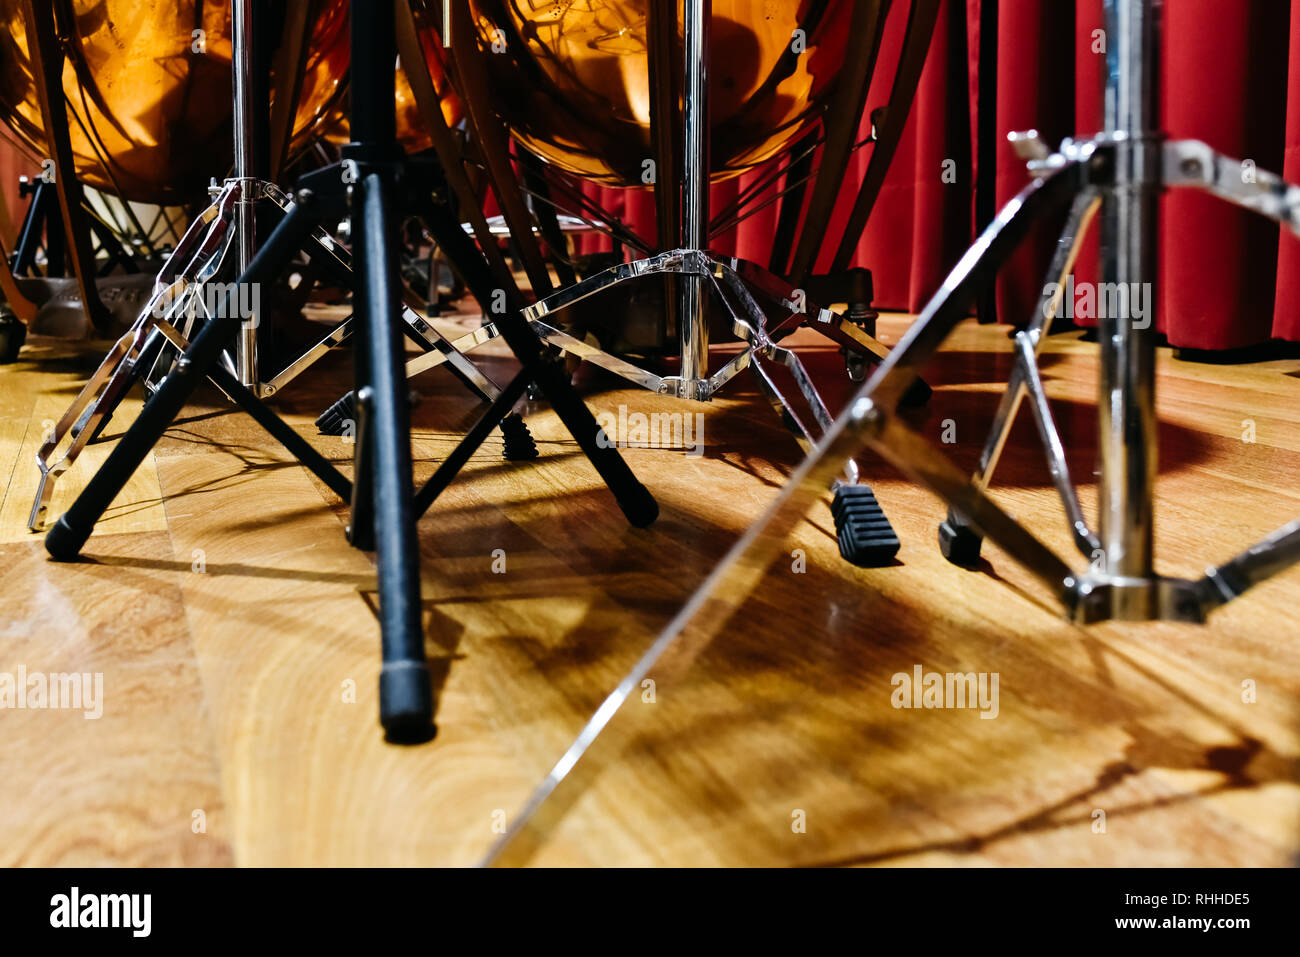 Tripods to hold percussion musical instruments. Stock Photo